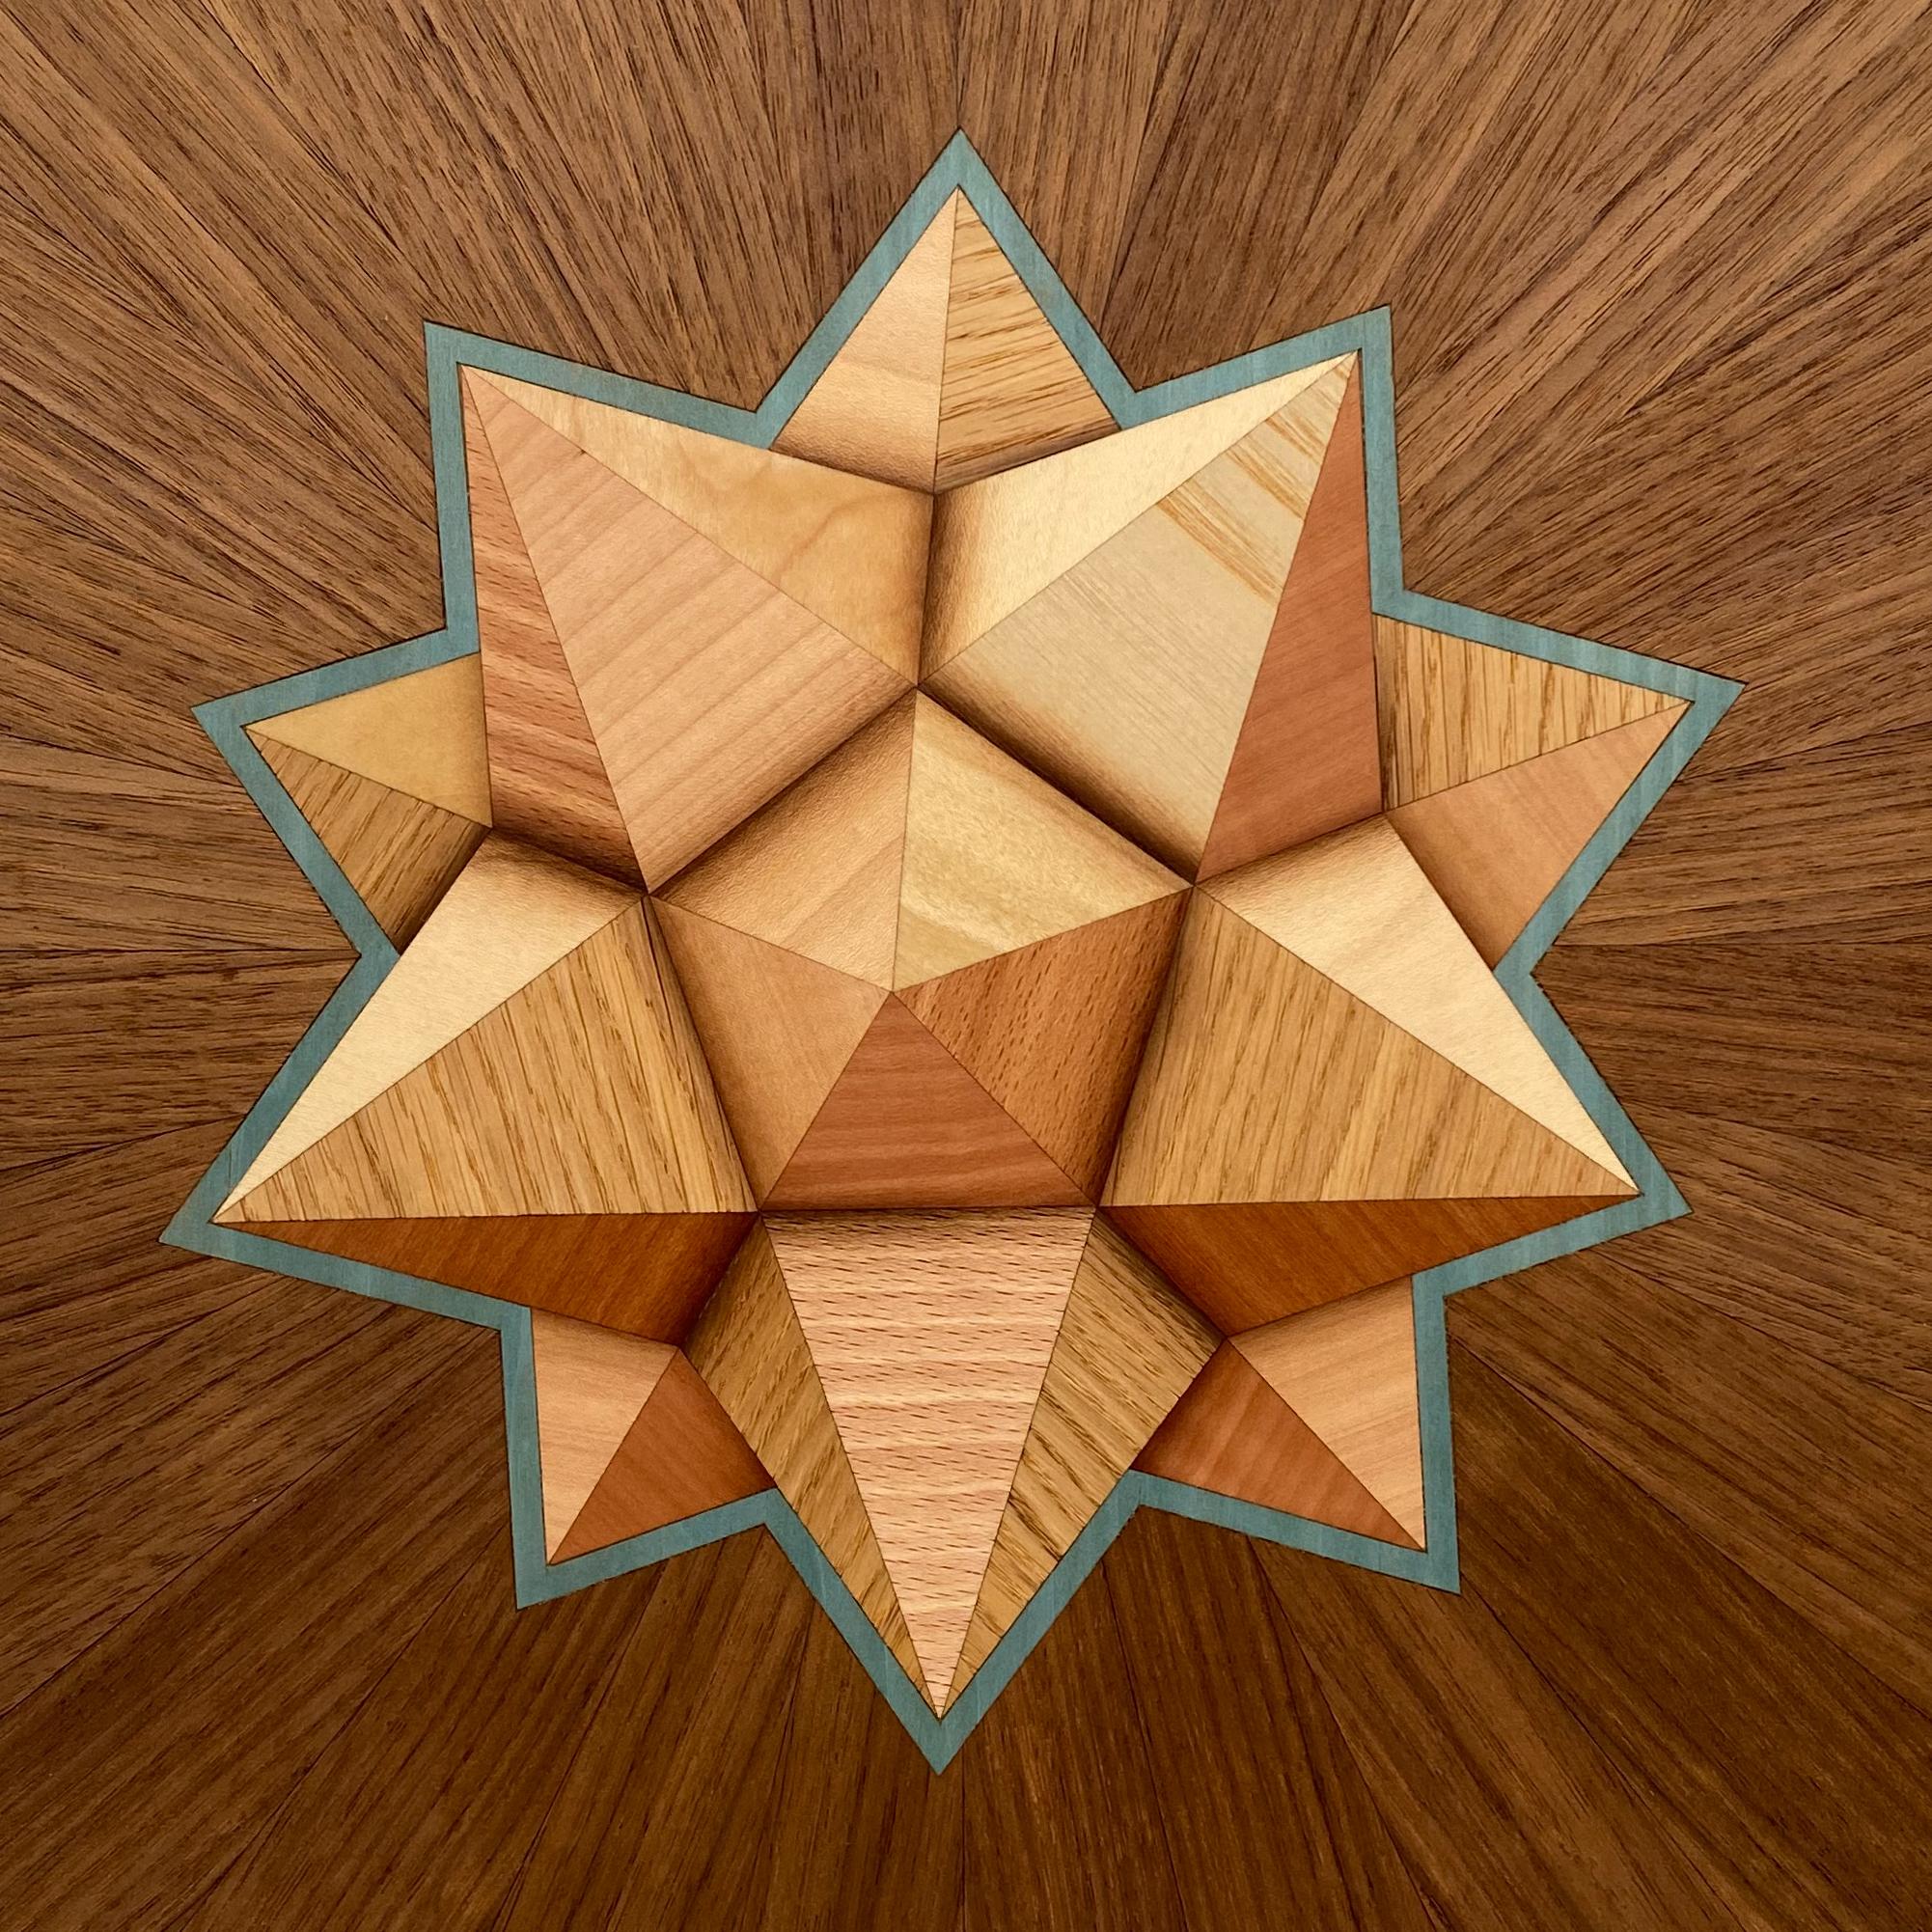 This recent artwork from the w o o d p o p studio is an example of the type of modern marquetry that w o o d p o p is becoming synonymous with. Since its inception 10 years ago - the studio has specialised in marquetry and inlay work; meticulous